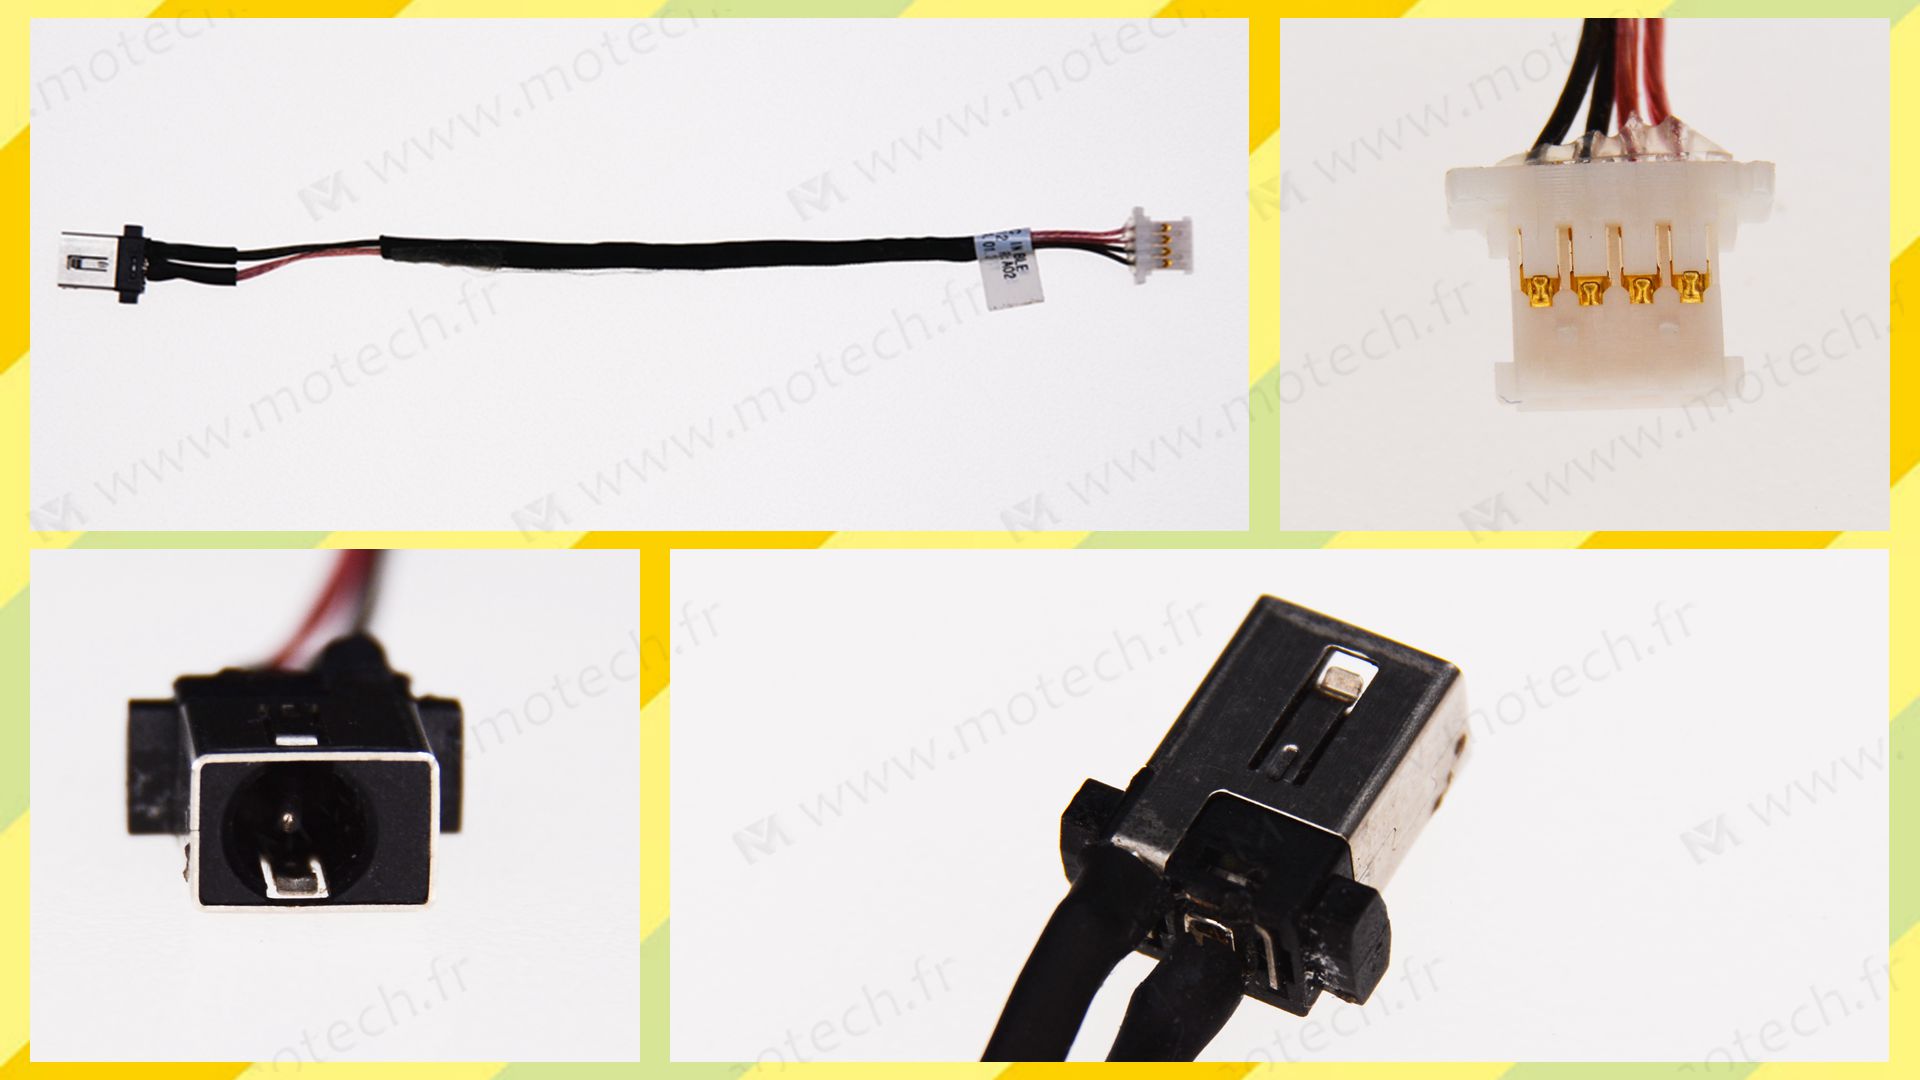 Acer S3-392 MS2385 charging connector, Acer S3-392 MS2385 DC Power Jack, Acer S3-392 MS2385 DC IN Cable, Acer S3-392 MS2385 Power Jack, Acer S3-392 MS2385 plug, Acer S3-392 MS2385 Jack socket, Acer S3-392 MS2385 connecteur de charge, 